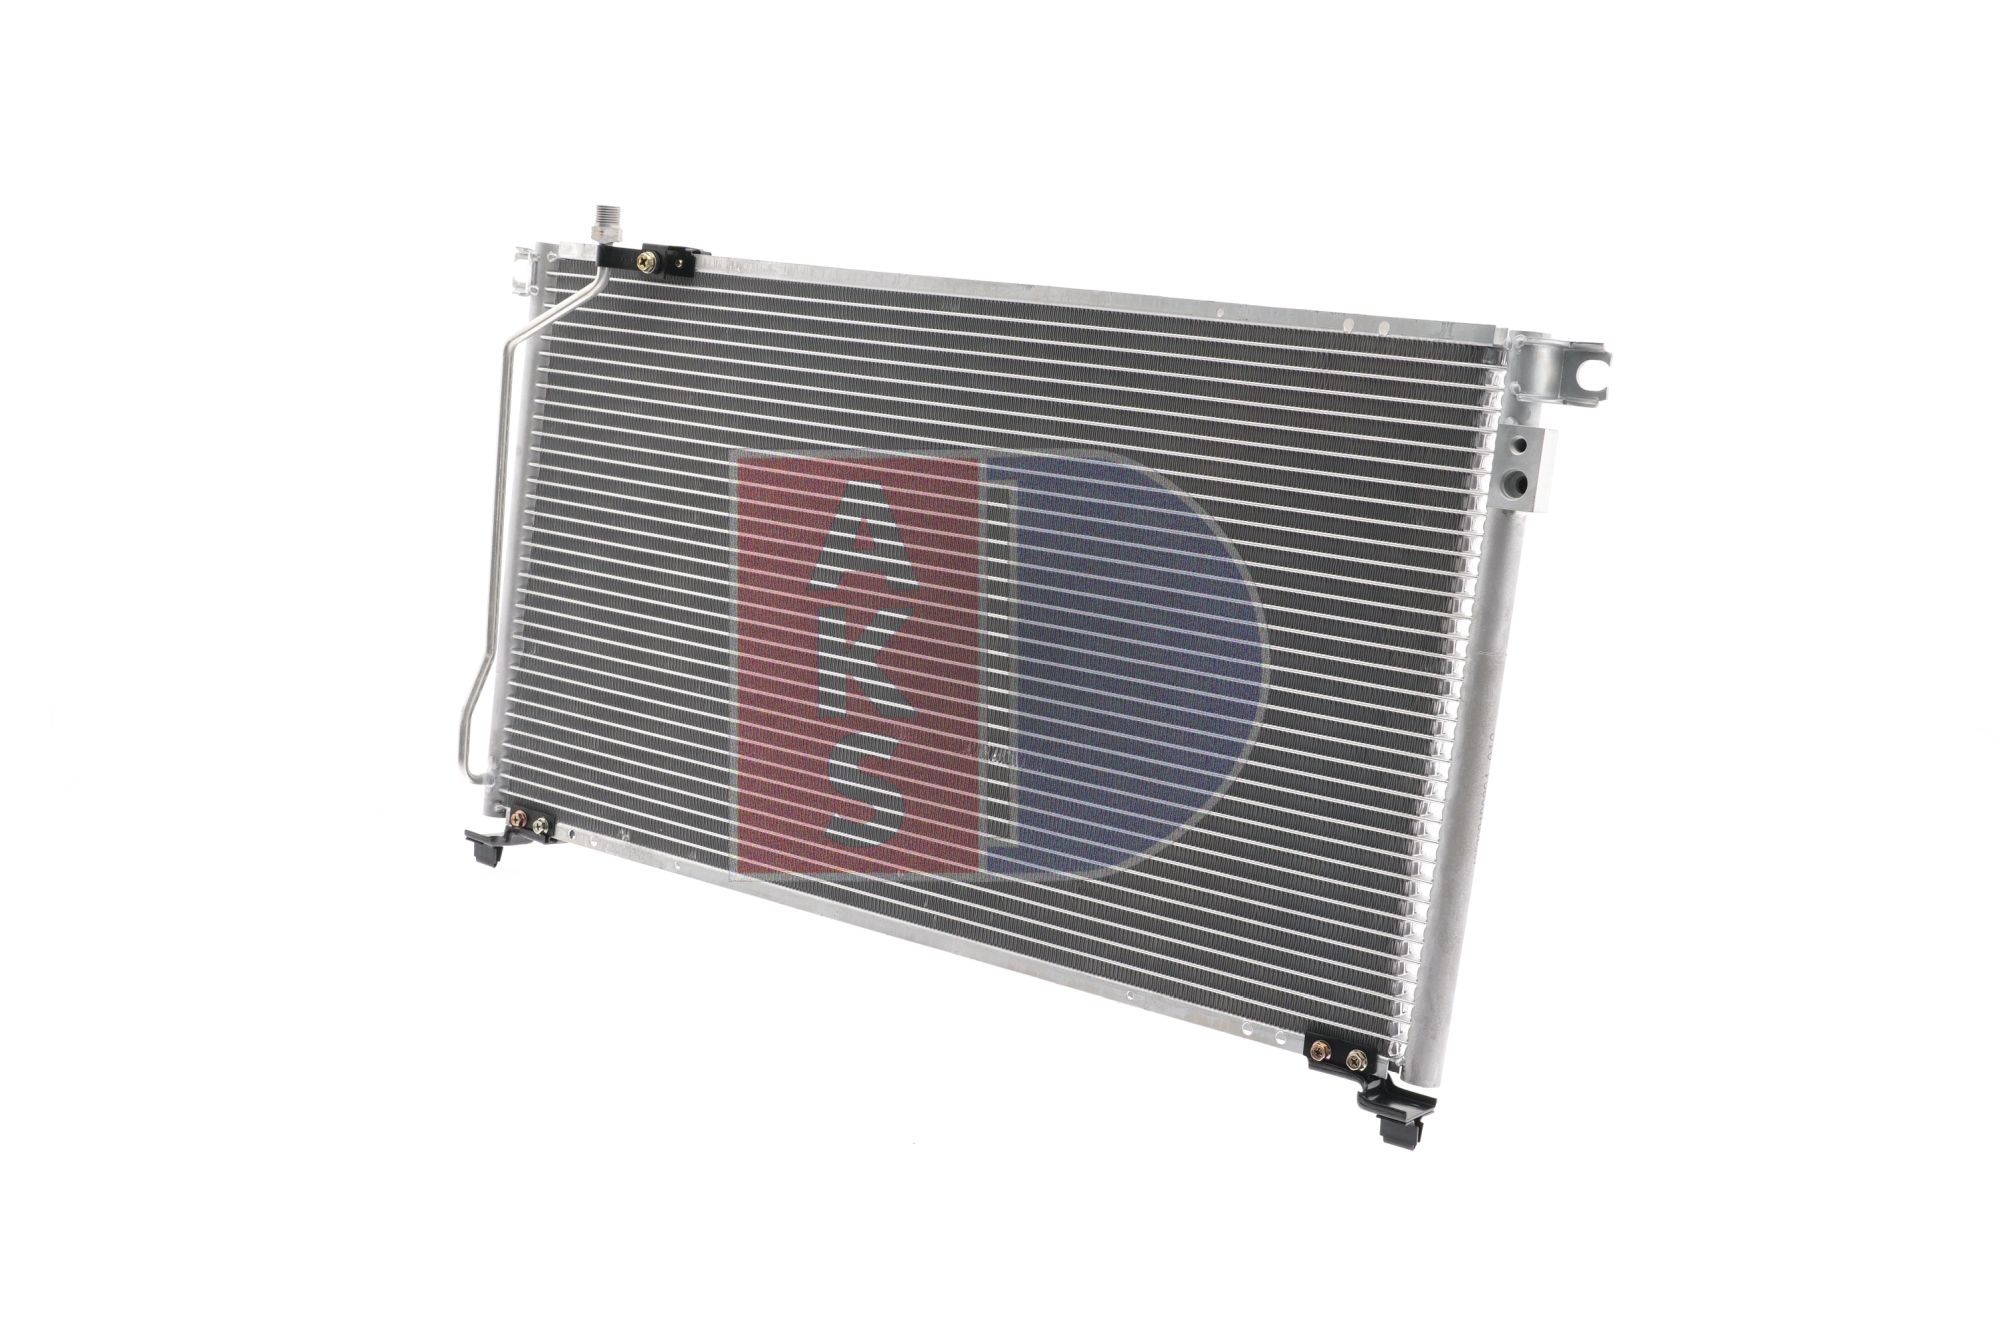 AKS DASIS 072007N Air conditioning condenser NISSAN experience and price